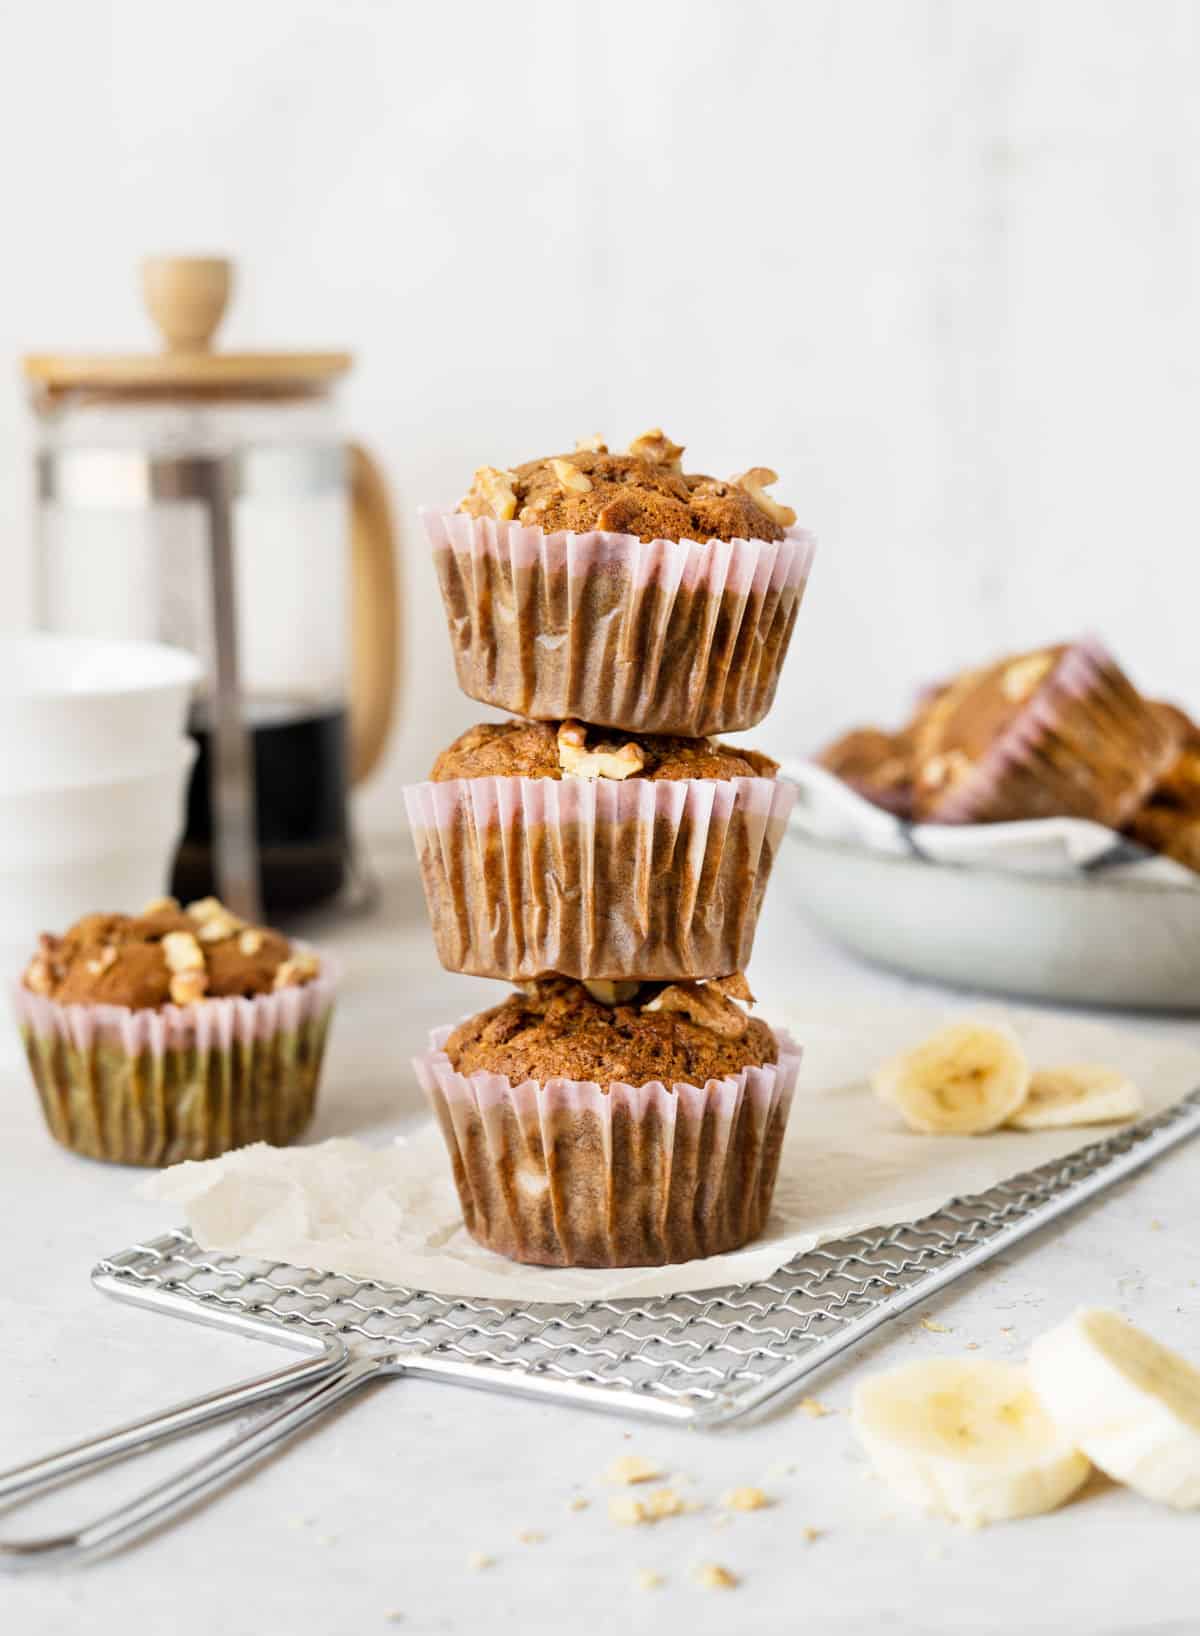 Stack of three banana muffins in paper liners on parchment paper and a rack. White surface and background with coffee maker and more muffins. 